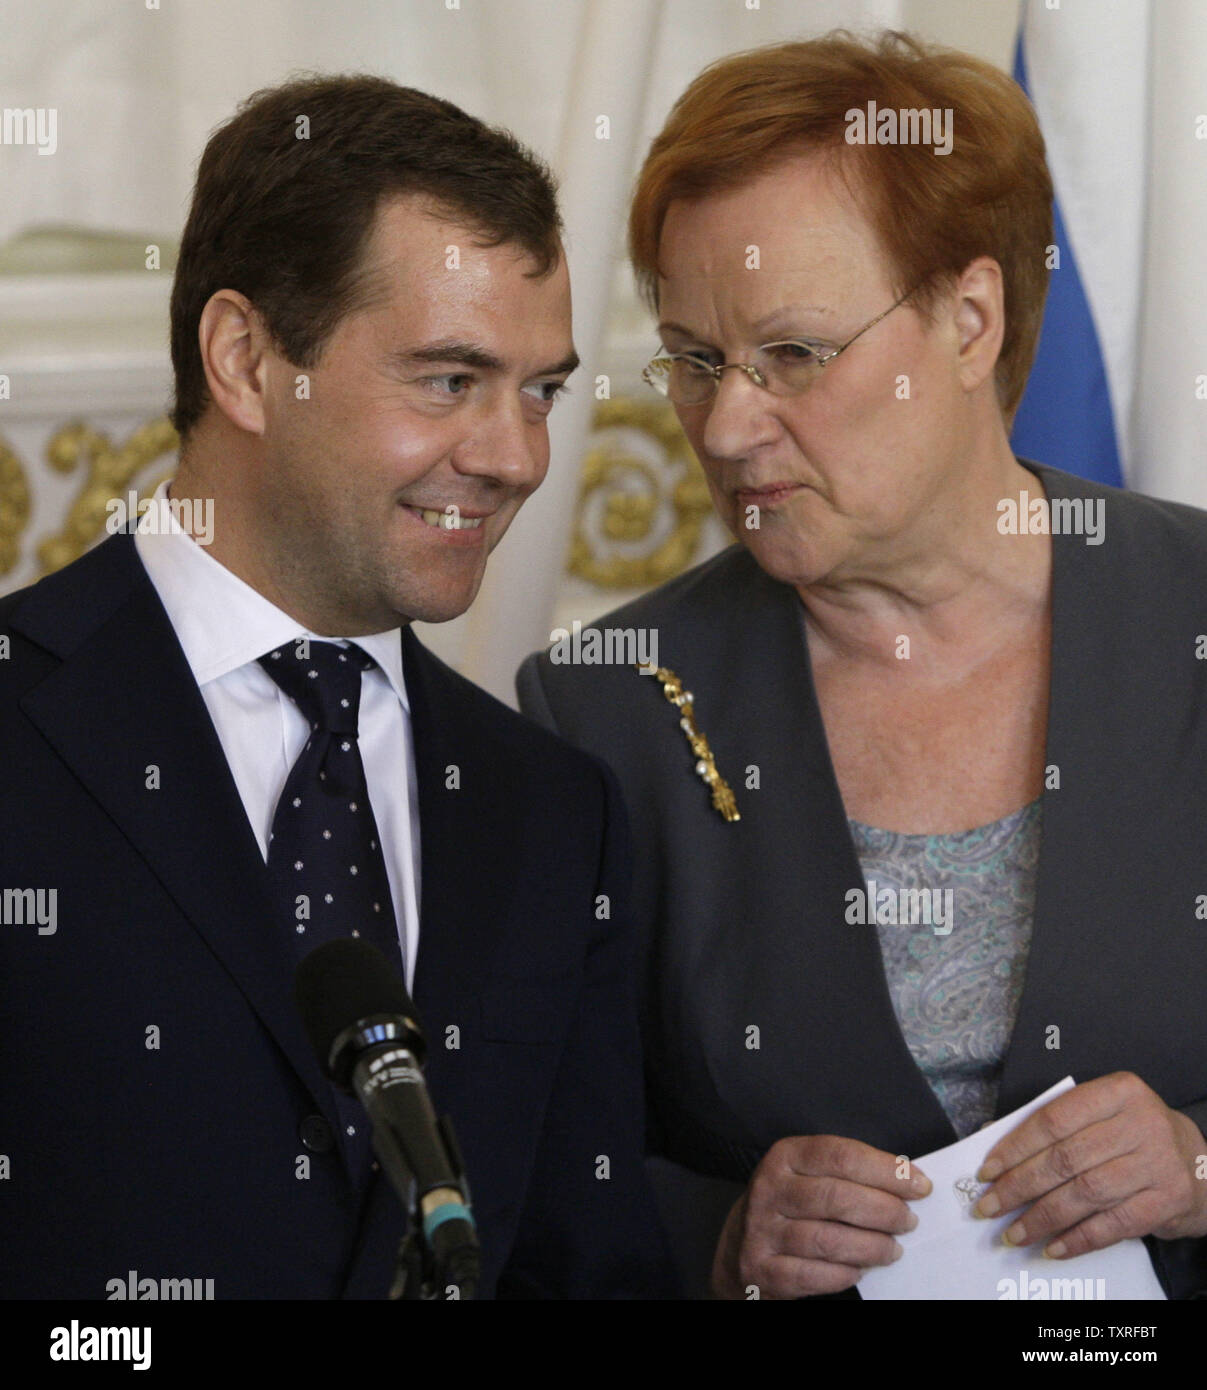 Russian President Dmitry Medvedev (L)and his Finnish counterpart Tarja Halonen chat during a joint news conference in Helsinki on April 20, 2009. Russia responded cautiously on Monday to U.S. President Barack Obamas plans for a nuclear-free world, saying a number of conditions would need to be met for the vision to become reality. (UPI Photo/Anatoli Zhdanov) Stock Photo